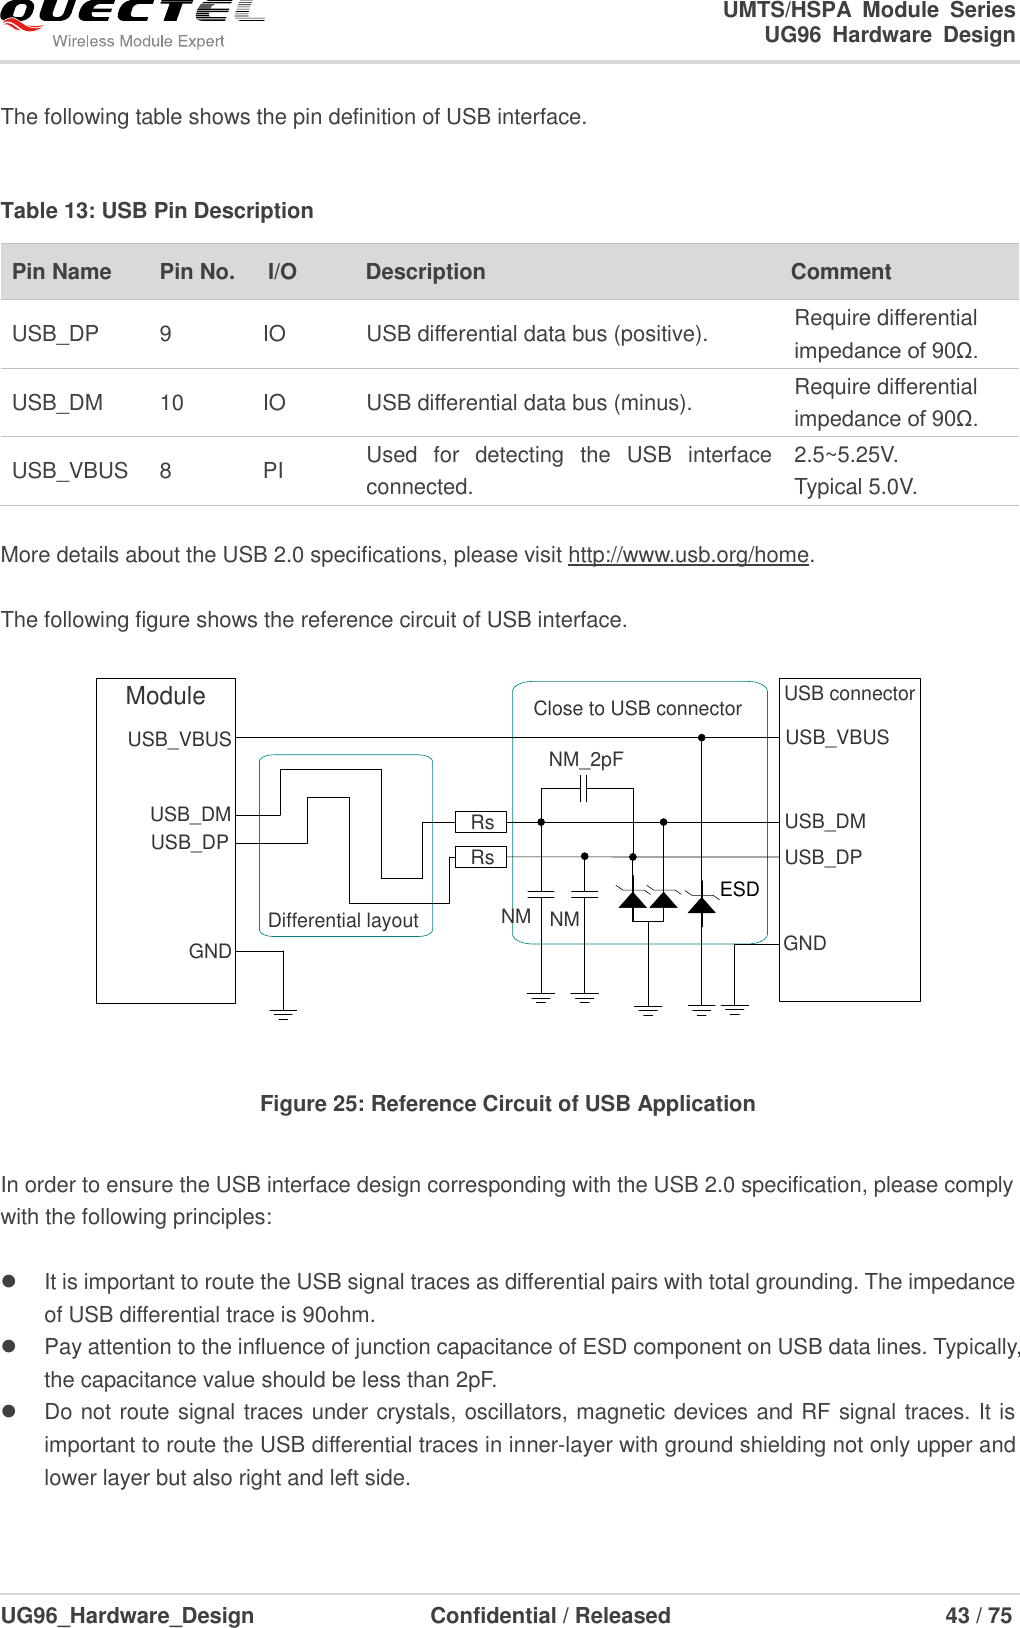                                                                        UMTS/HSPA  Module  Series                                                                 UG96  Hardware  Design  UG96_Hardware_Design                  Confidential / Released                             43 / 75    The following table shows the pin definition of USB interface.    Table 13: USB Pin Description Pin Name   Pin No.   I/O Description Comment USB_DP 9 IO USB differential data bus (positive). Require differential impedance of 90Ω. USB_DM 10 IO USB differential data bus (minus). Require differential impedance of 90Ω. USB_VBUS 8 PI Used  for  detecting  the  USB  interface connected. 2.5~5.25V. Typical 5.0V.  More details about the USB 2.0 specifications, please visit http://www.usb.org/home.  The following figure shows the reference circuit of USB interface.  ModuleUSB_VBUSUSB_DPUSB_DMGNDUSB connectorClose to USB connectorDifferential layoutUSB_VBUSUSB_DPUSB_DMGNDNM_2pFESDNM NMRsRs Figure 25: Reference Circuit of USB Application  In order to ensure the USB interface design corresponding with the USB 2.0 specification, please comply with the following principles:    It is important to route the USB signal traces as differential pairs with total grounding. The impedance of USB differential trace is 90ohm.   Pay attention to the influence of junction capacitance of ESD component on USB data lines. Typically, the capacitance value should be less than 2pF.   Do not route signal traces under crystals, oscillators, magnetic devices and RF signal traces. It is important to route the USB differential traces in inner-layer with ground shielding not only upper and lower layer but also right and left side.  